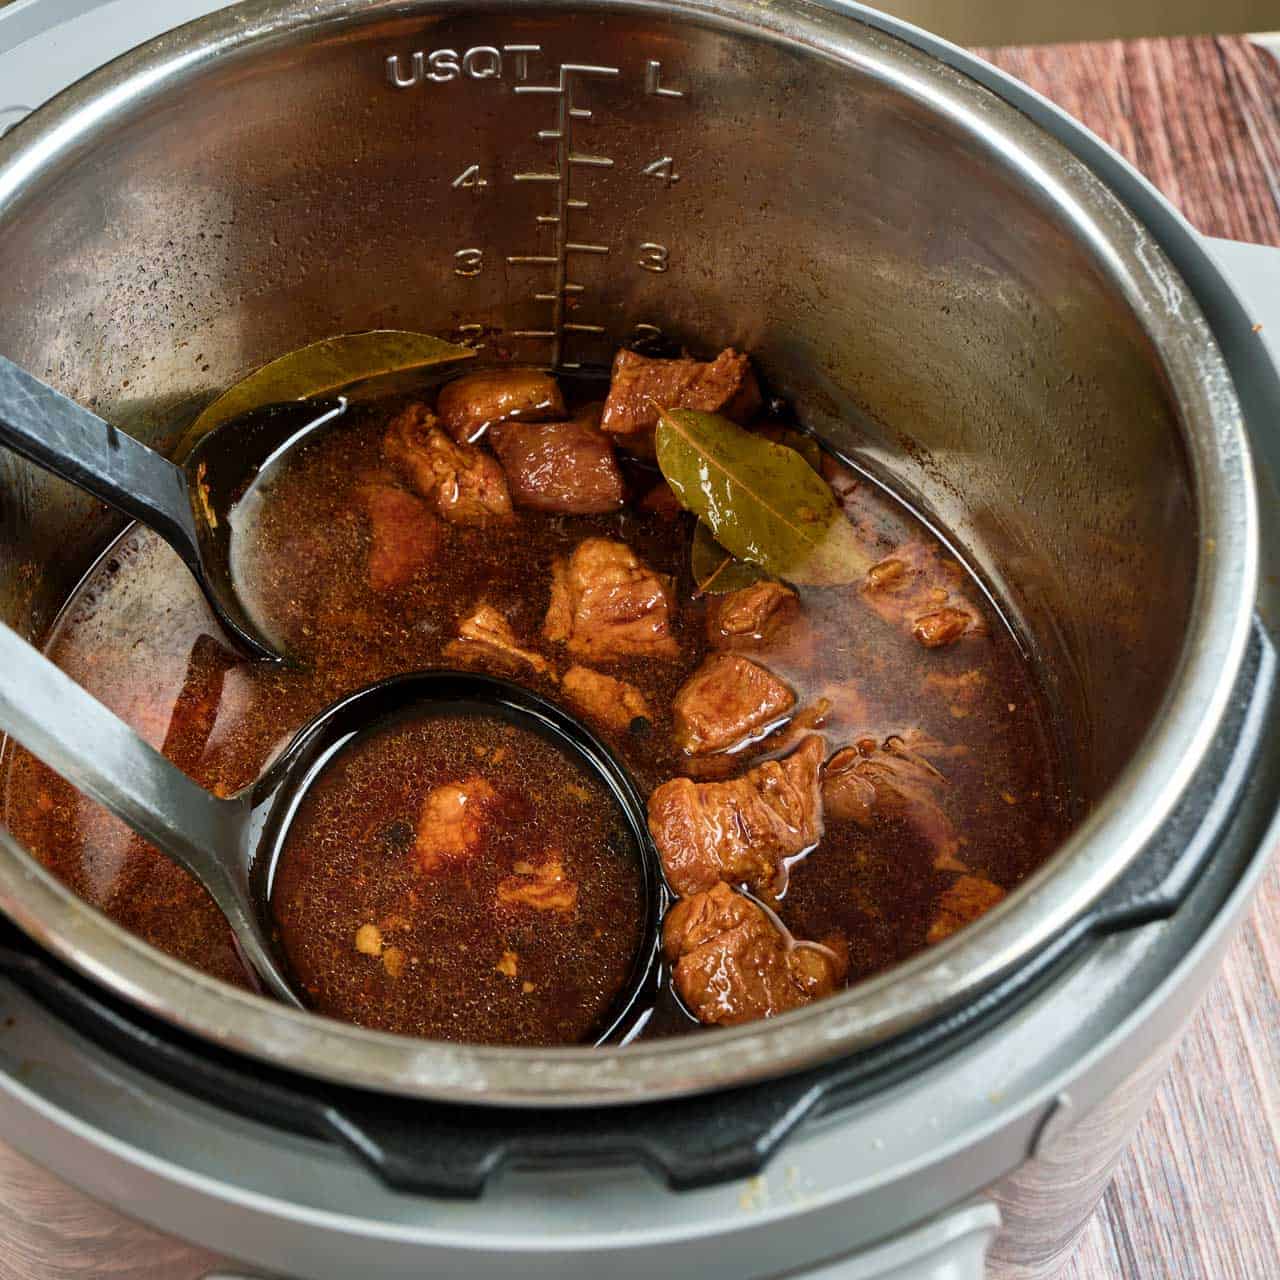 An Instant Pot with a ladle scooping cooked pork adobo and its liquid